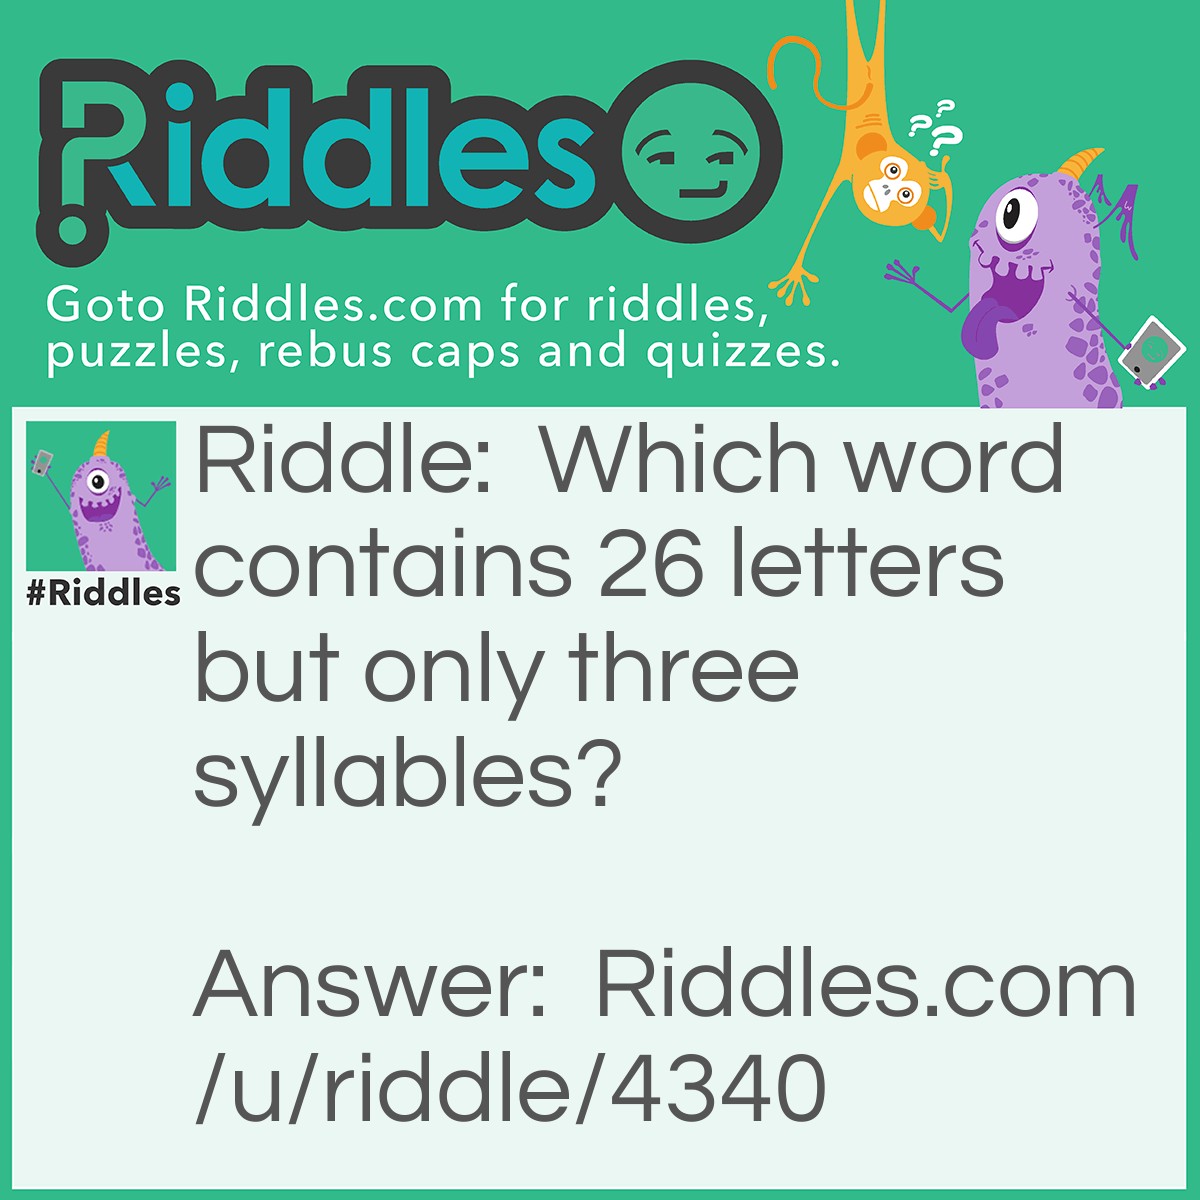 Riddle: Which word contains 26 letters but only three syllables? Answer: Alphabet.